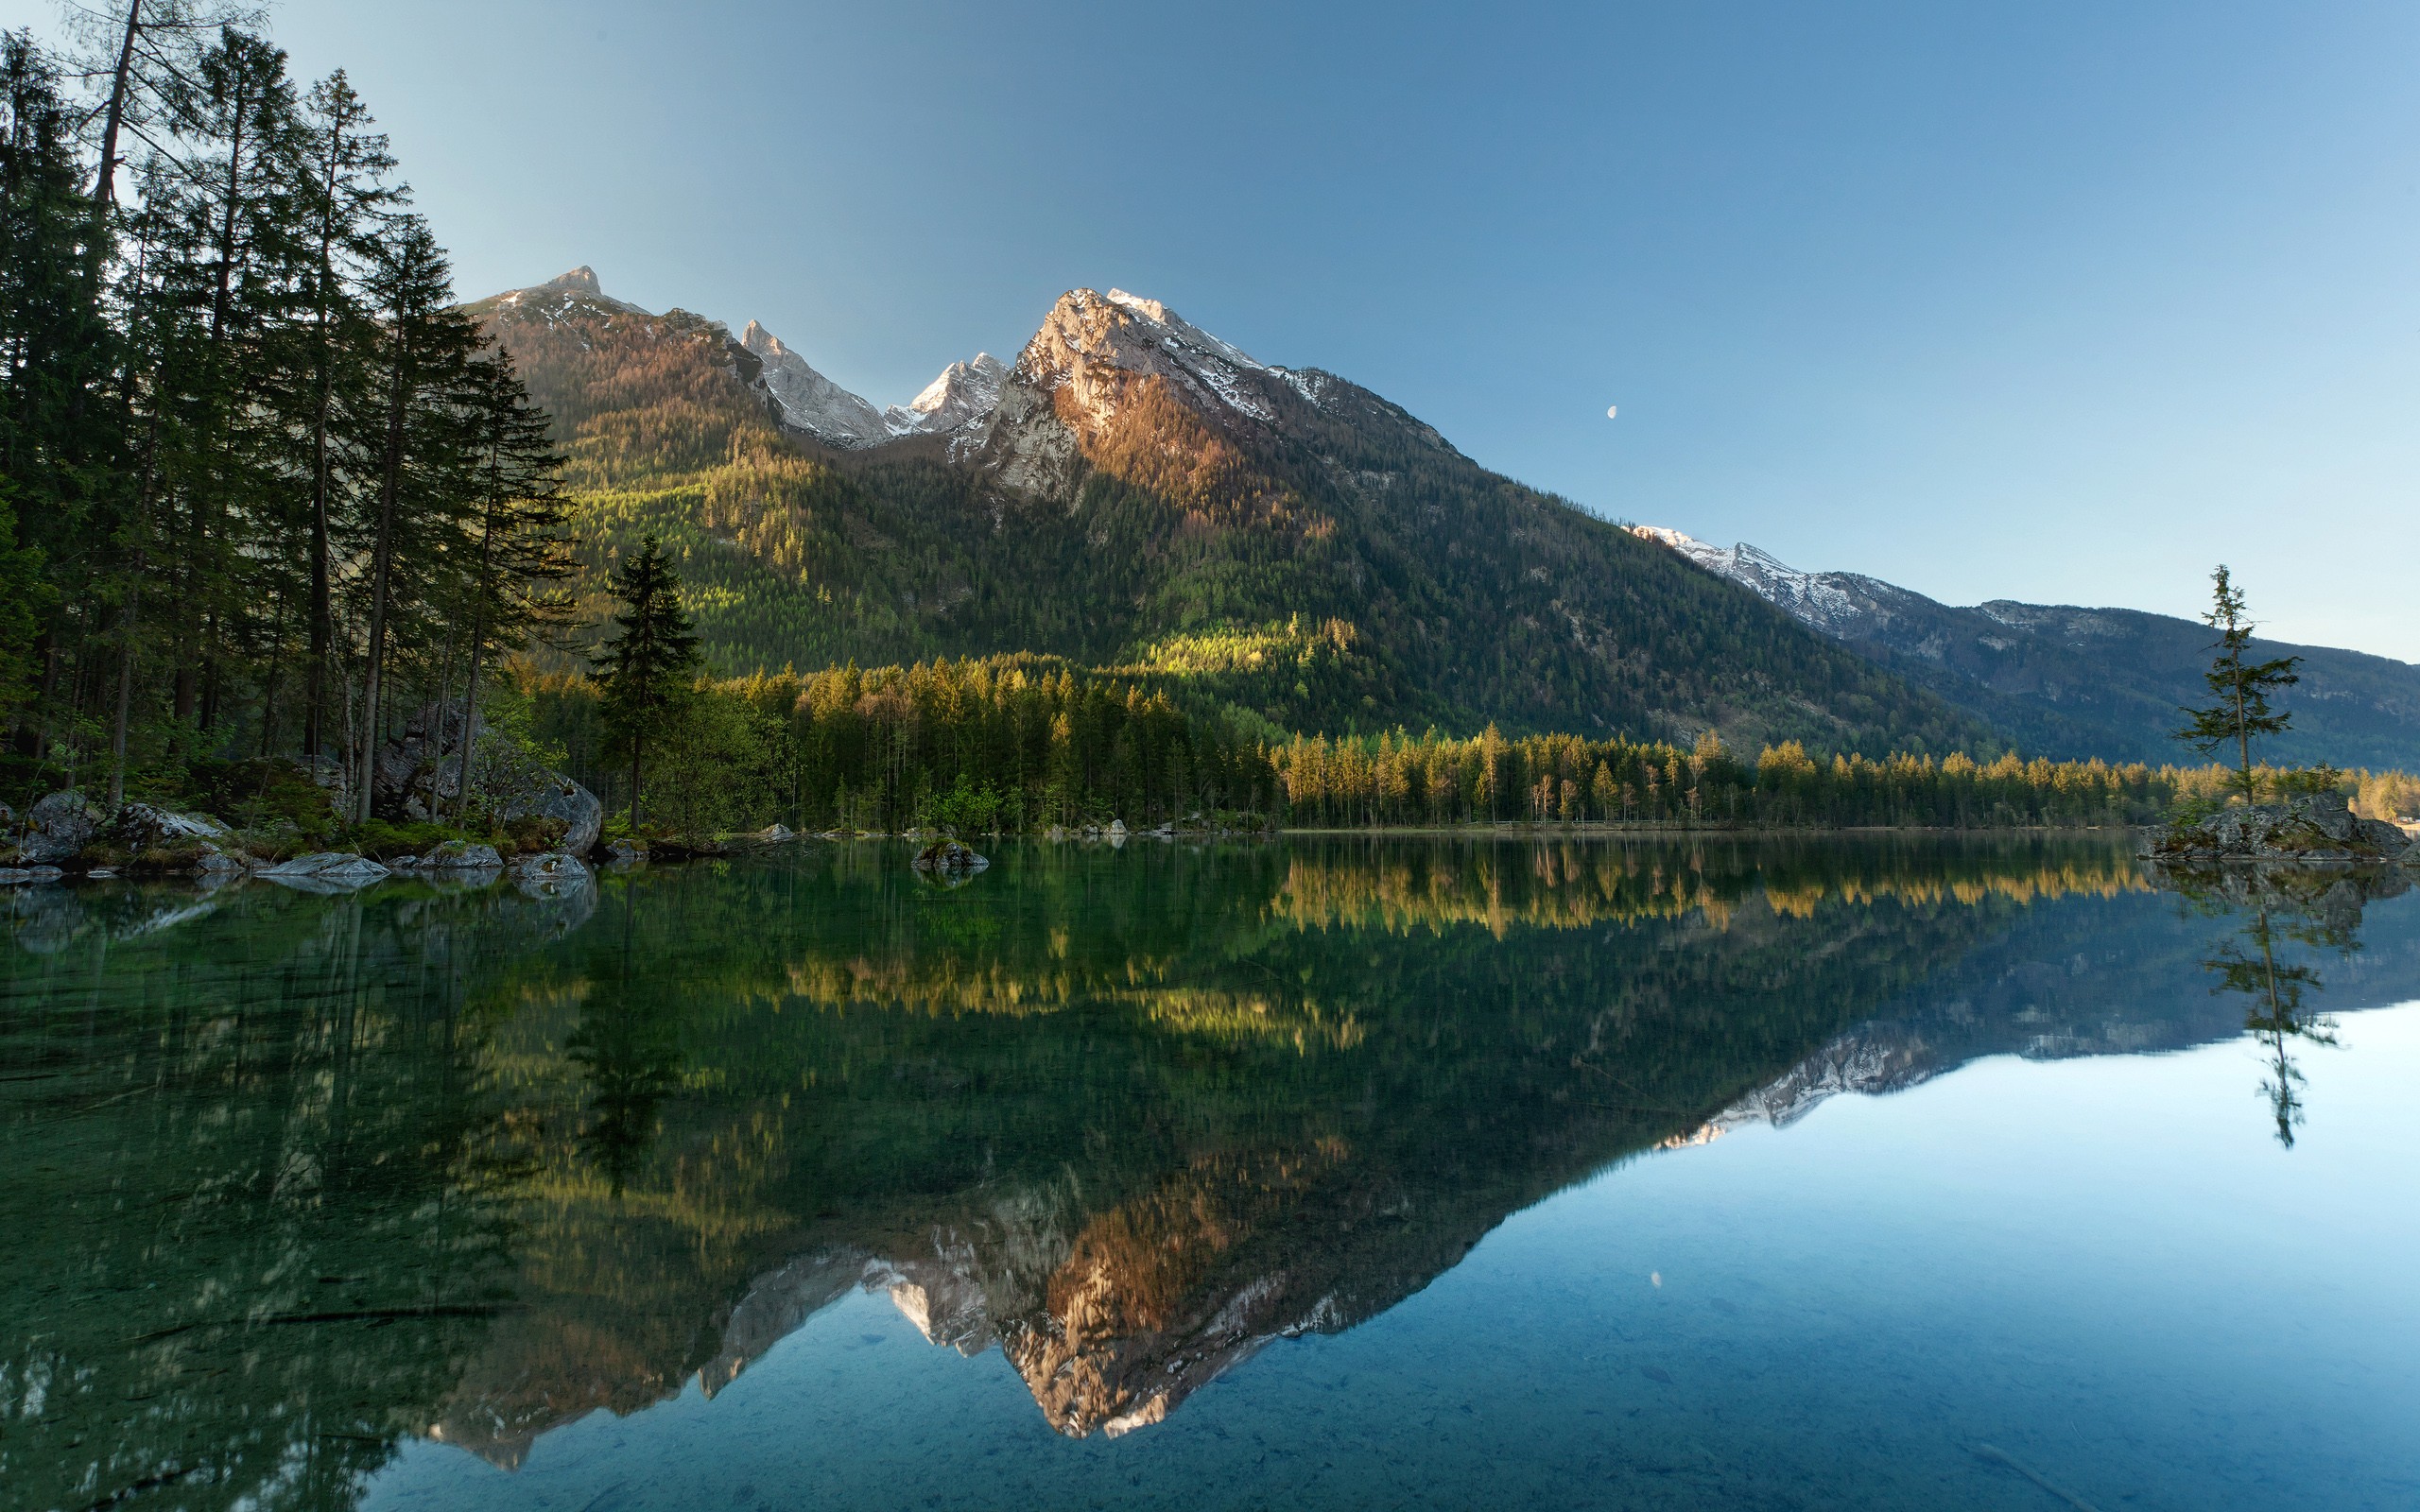 General 2560x1600 nature landscape mountains reflection water Austria Hintersee